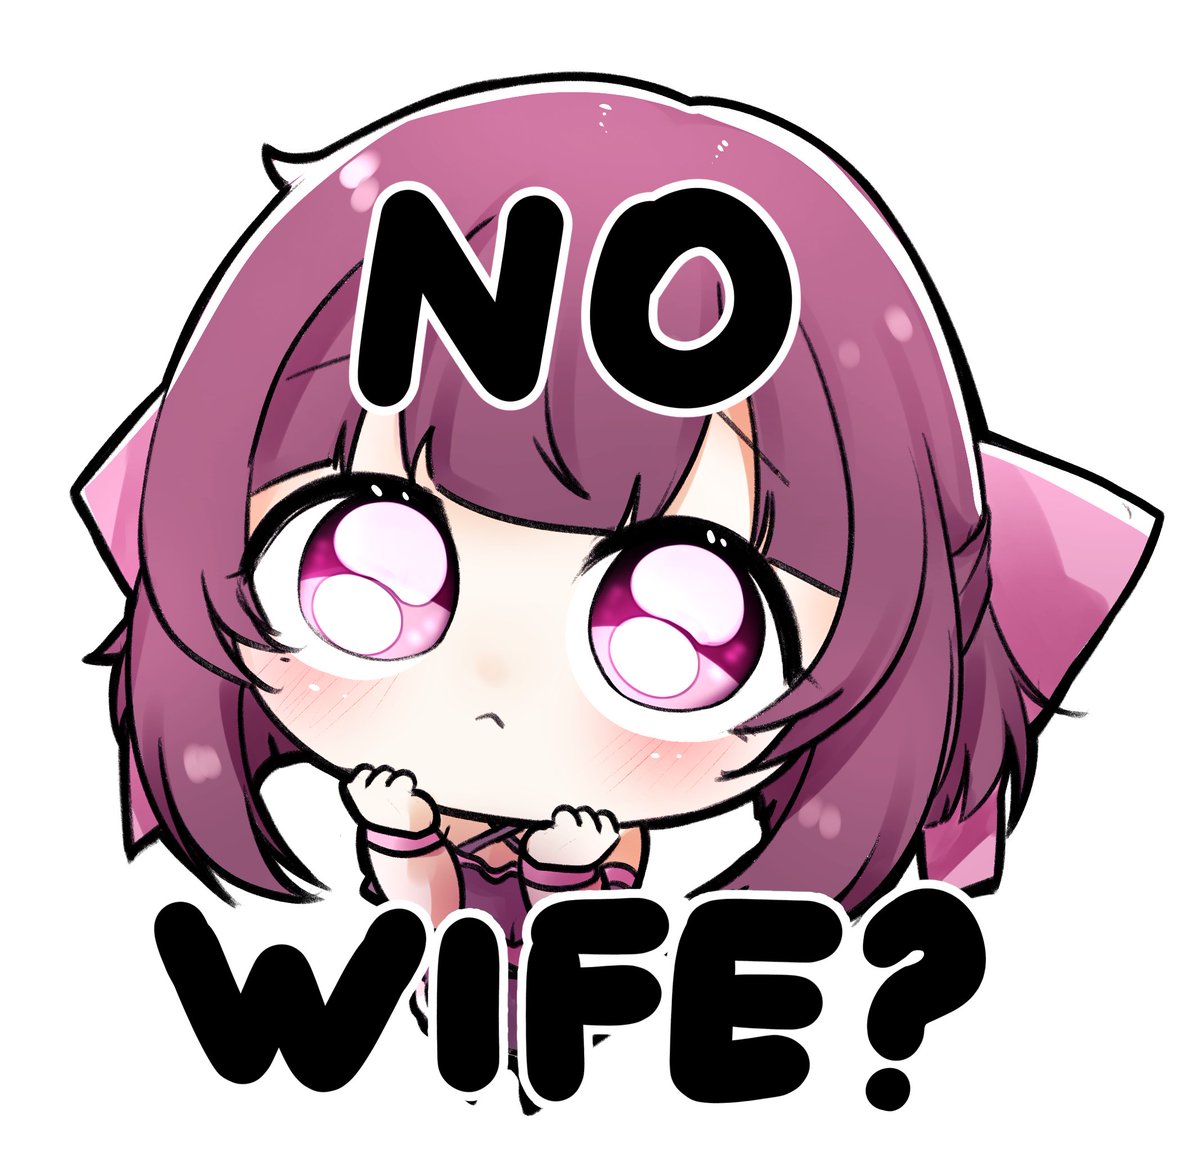 「No wife?#sliceofshadow 」|KGhazir (comms: FULL)のイラスト